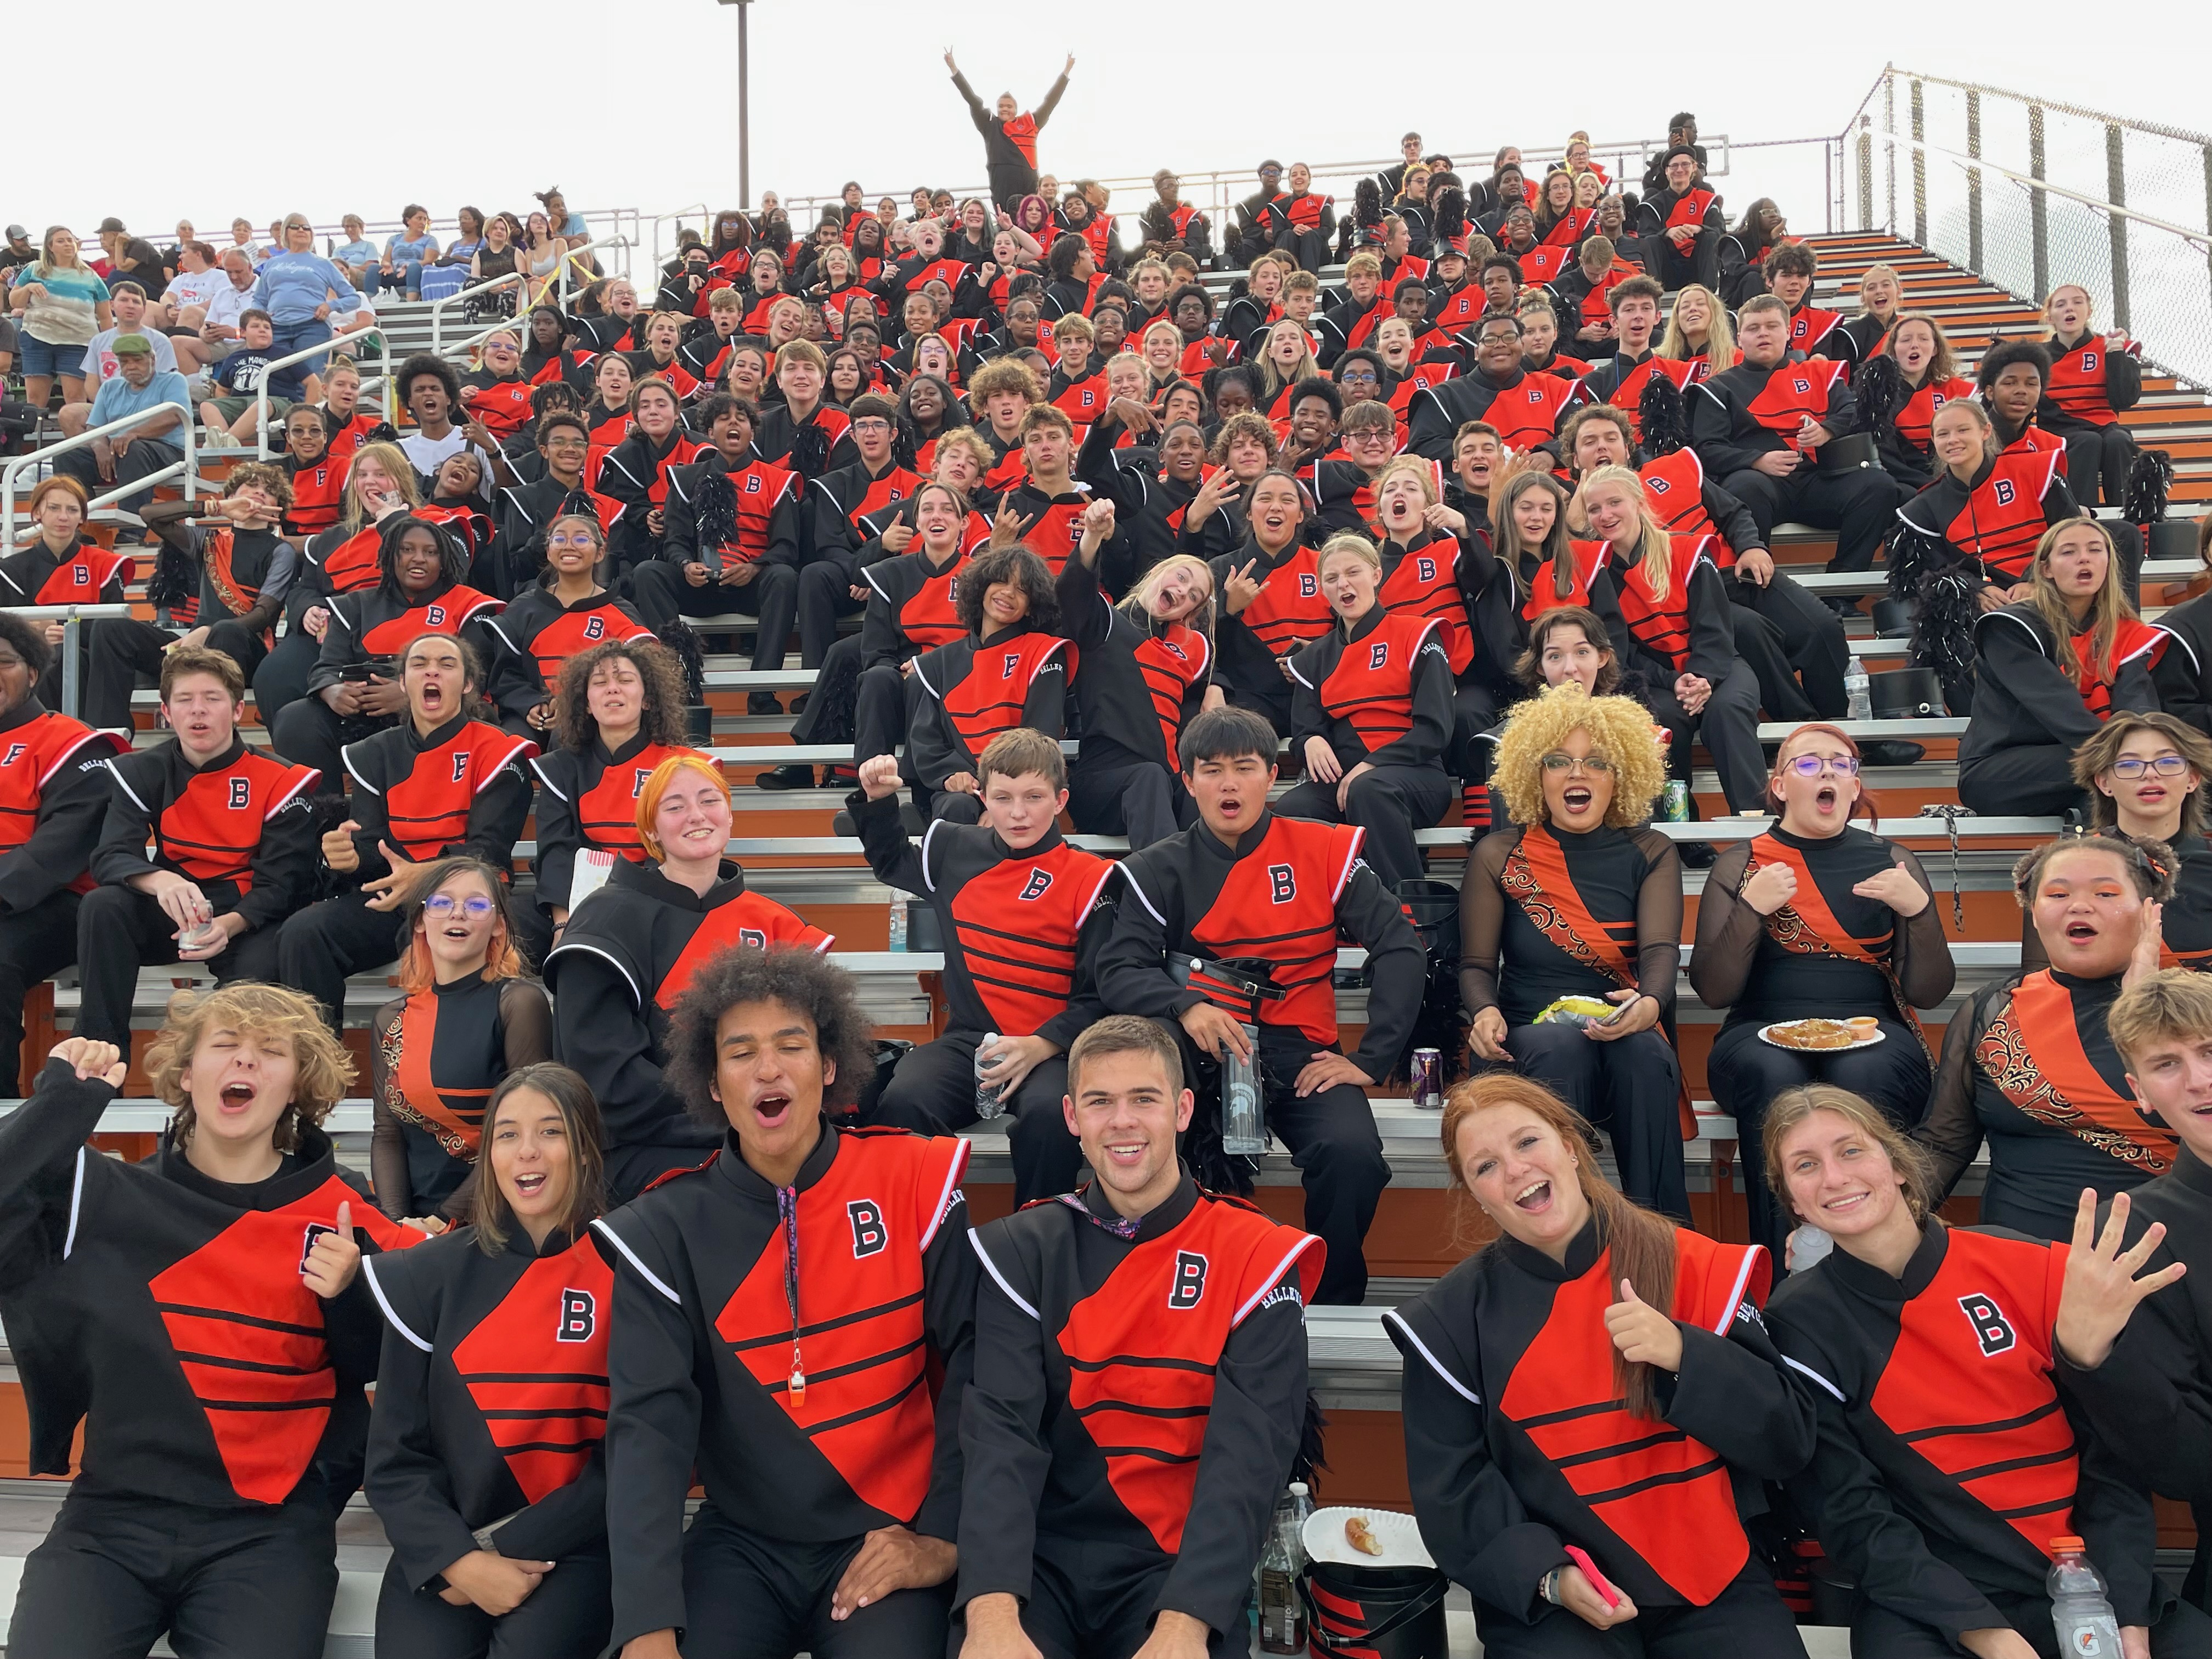 BHS Marching Band